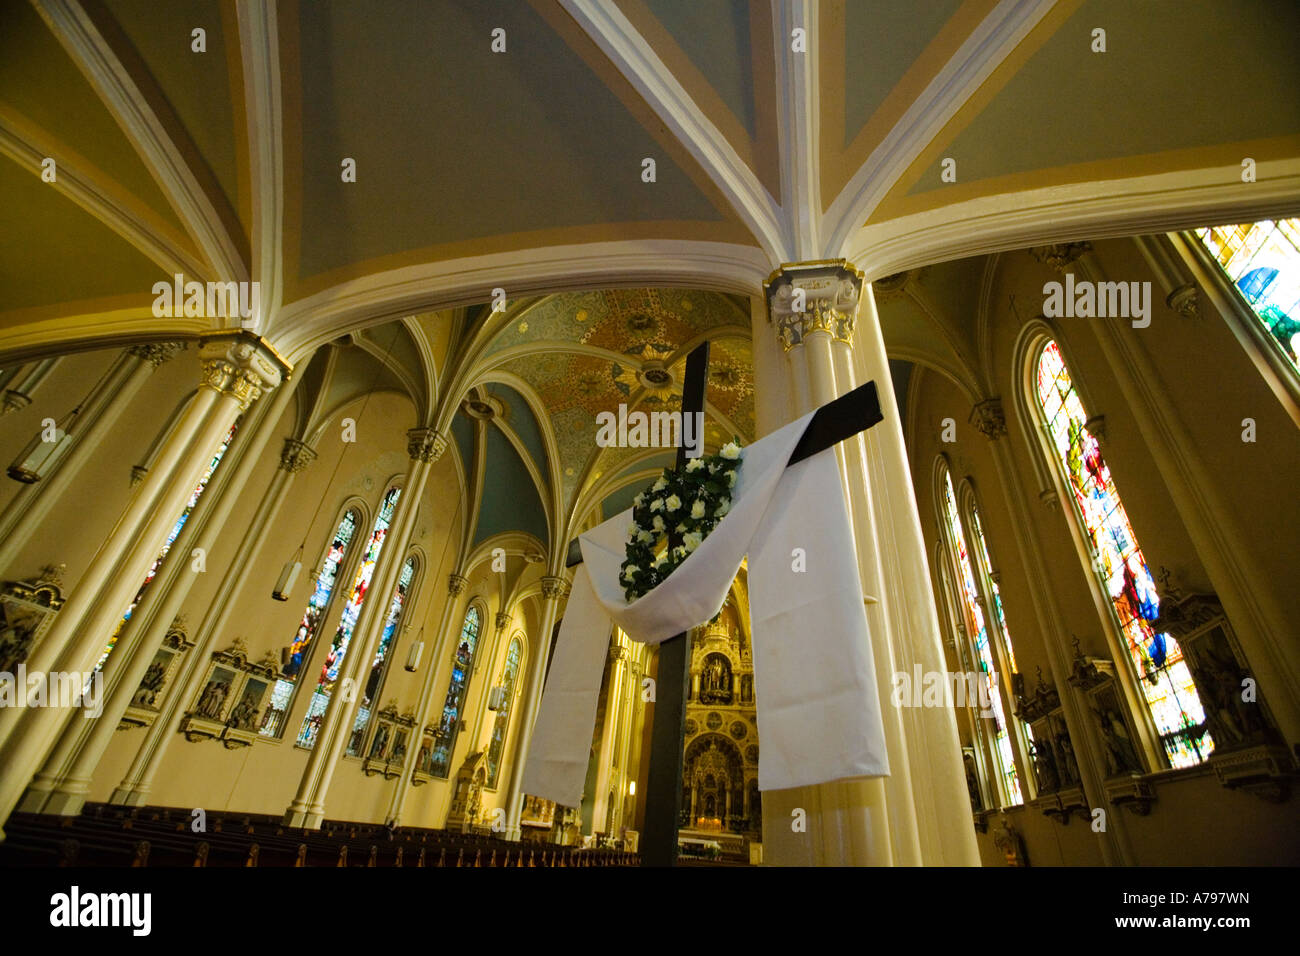 CHICAGO Illinois Interior of St Michaels Catholic Church draped cross lilies Easter stained glass windows Stock Photo